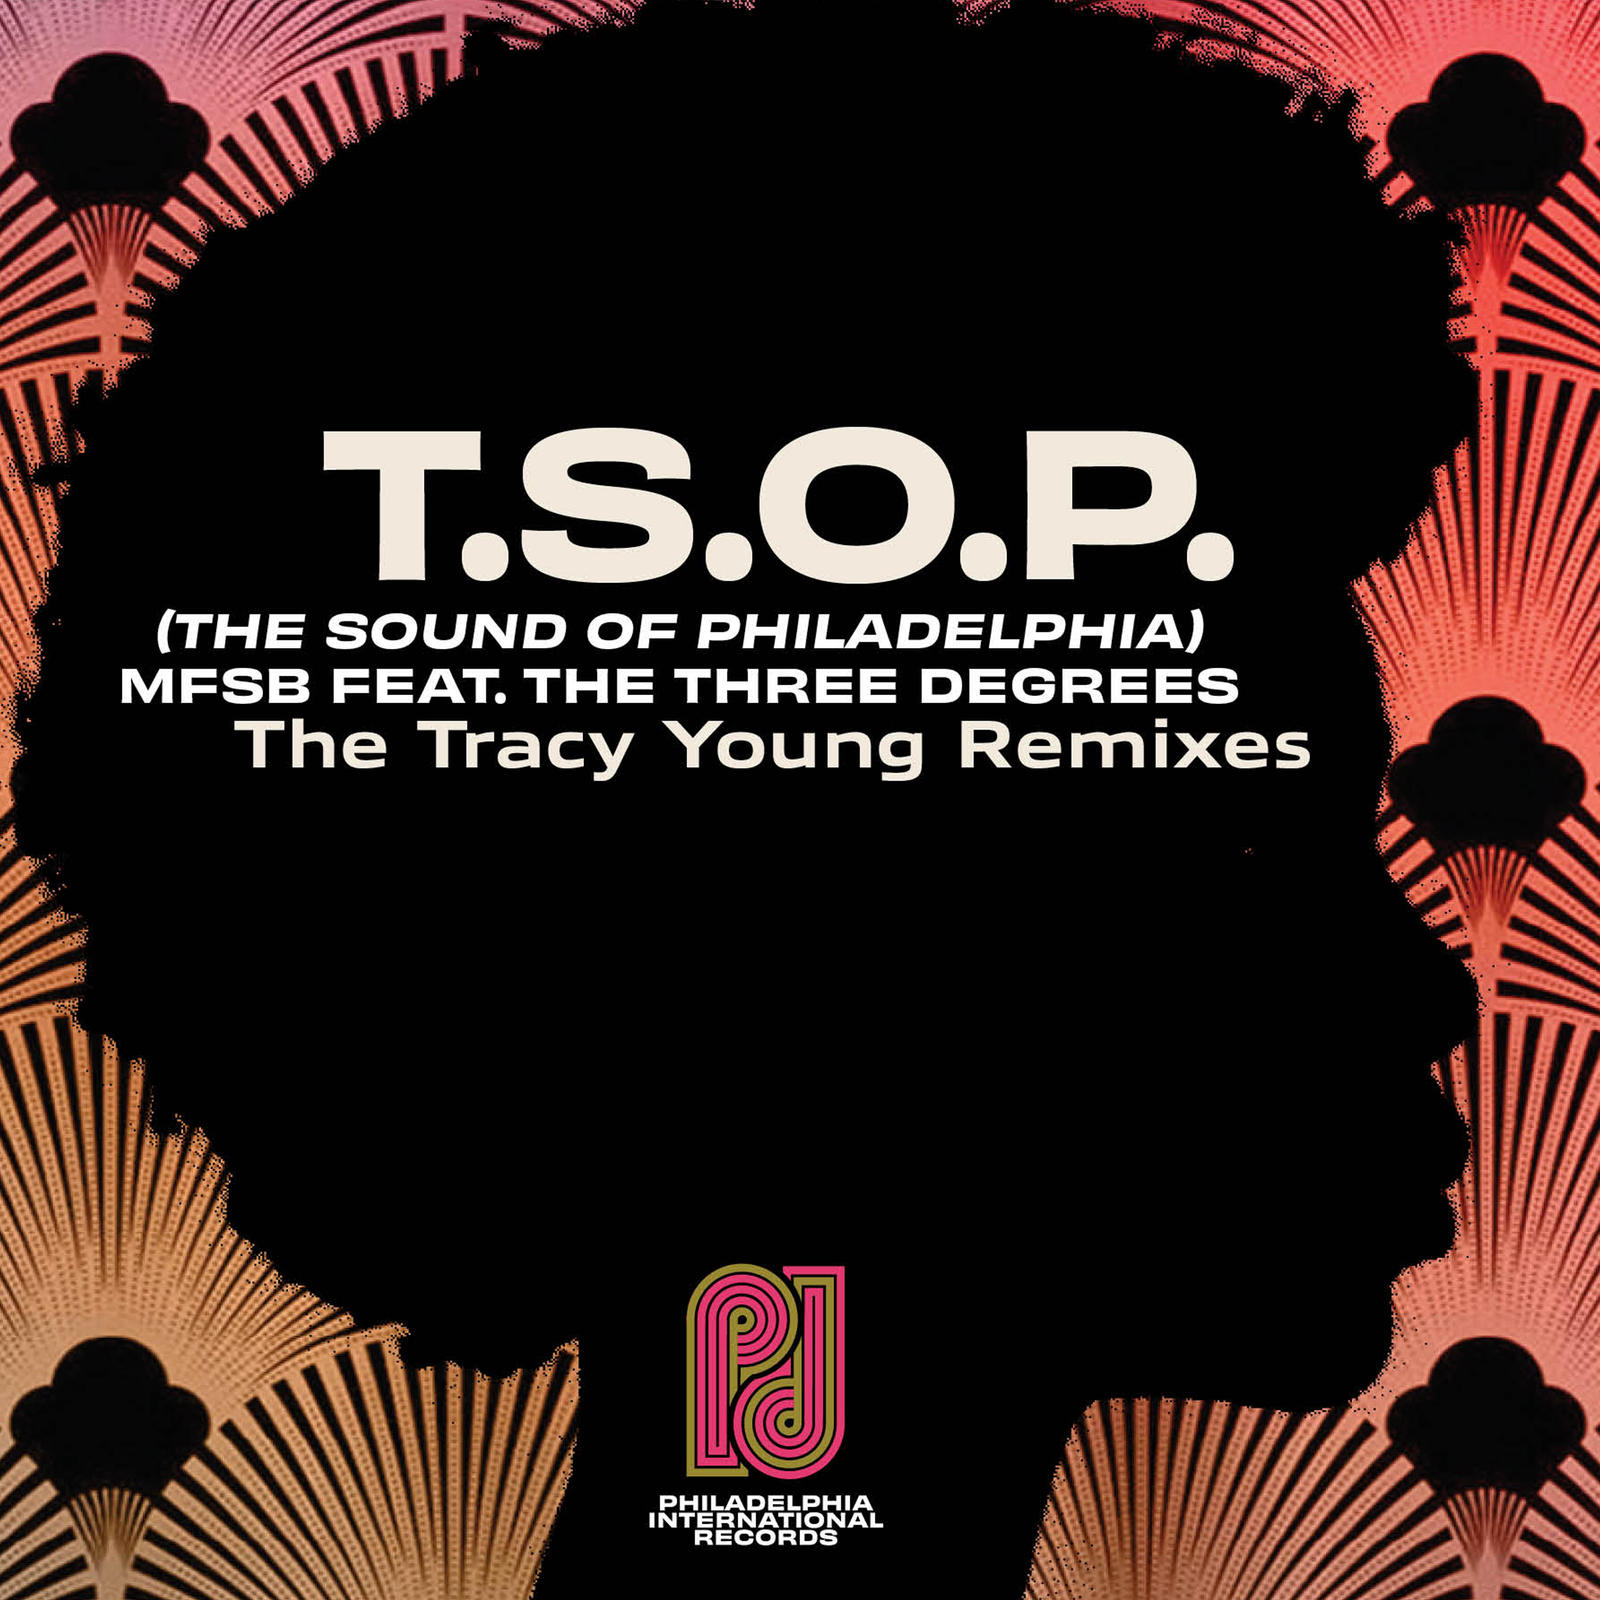 MFSB ft The Three Degrees - T.S.O.P. (The Sound of Philadelphia) (Tracy Young Remix)